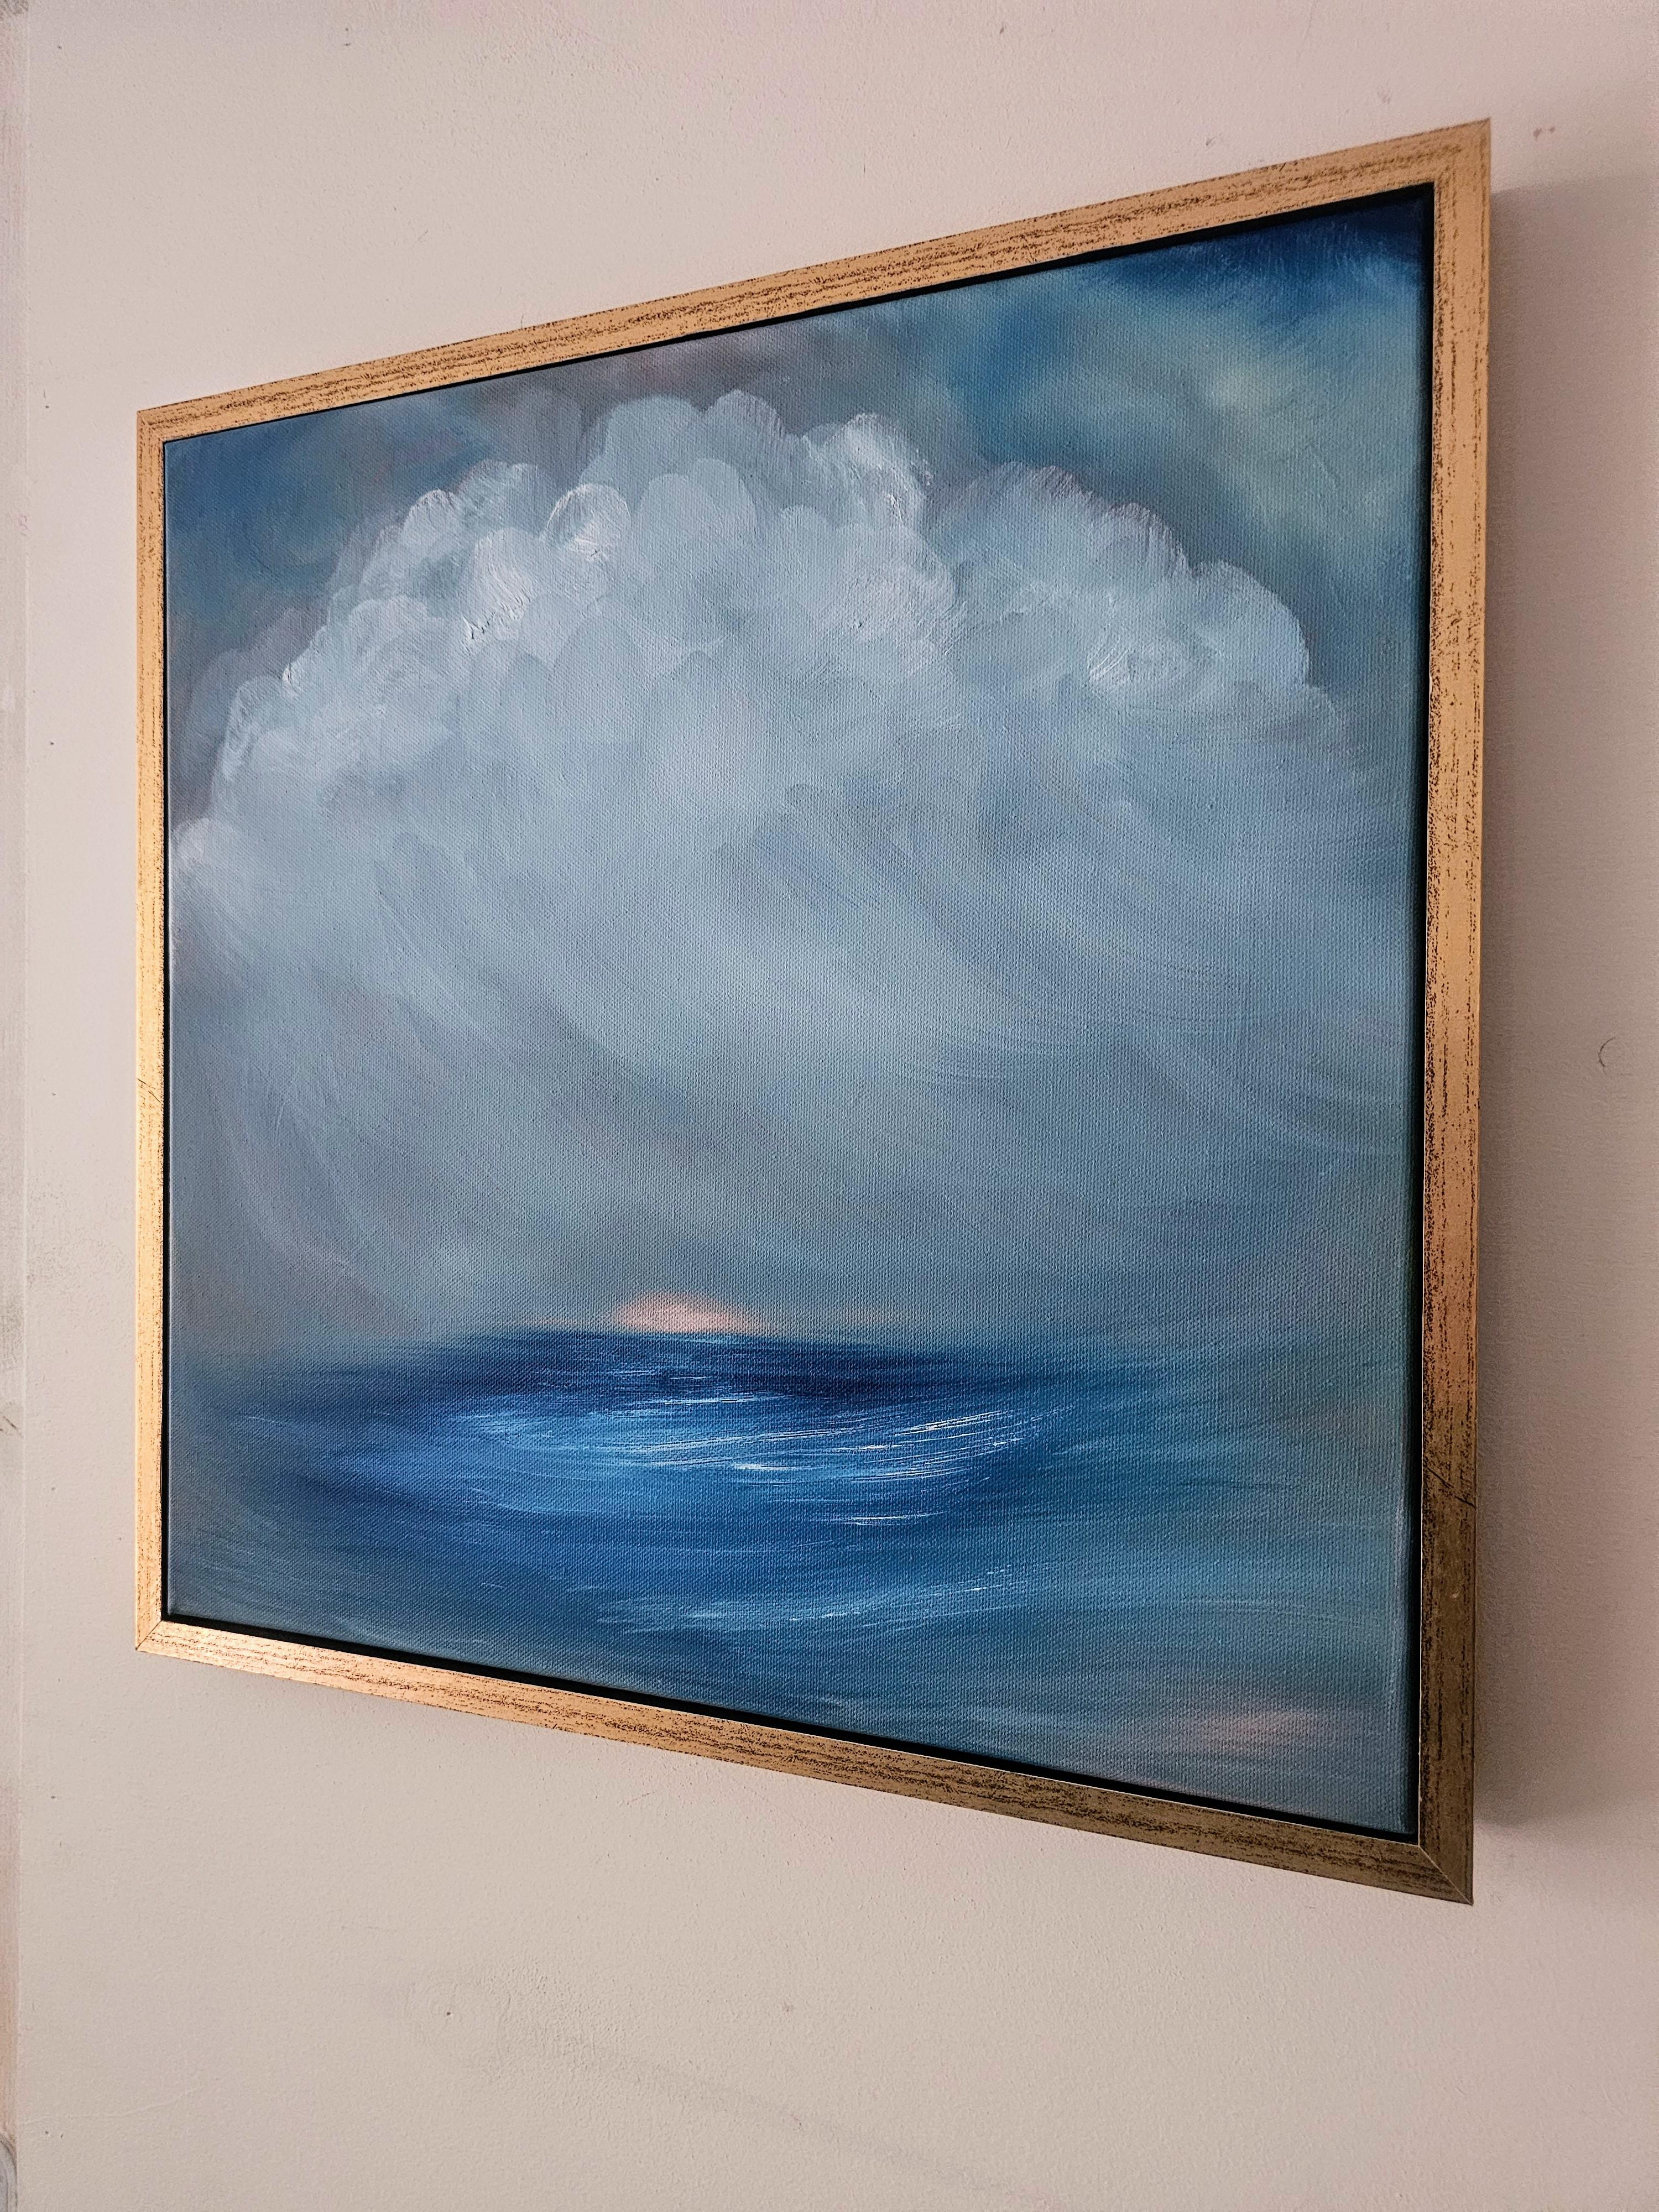 Sailing on the astral plane - Framed abstract blue seascape painting For Sale 1